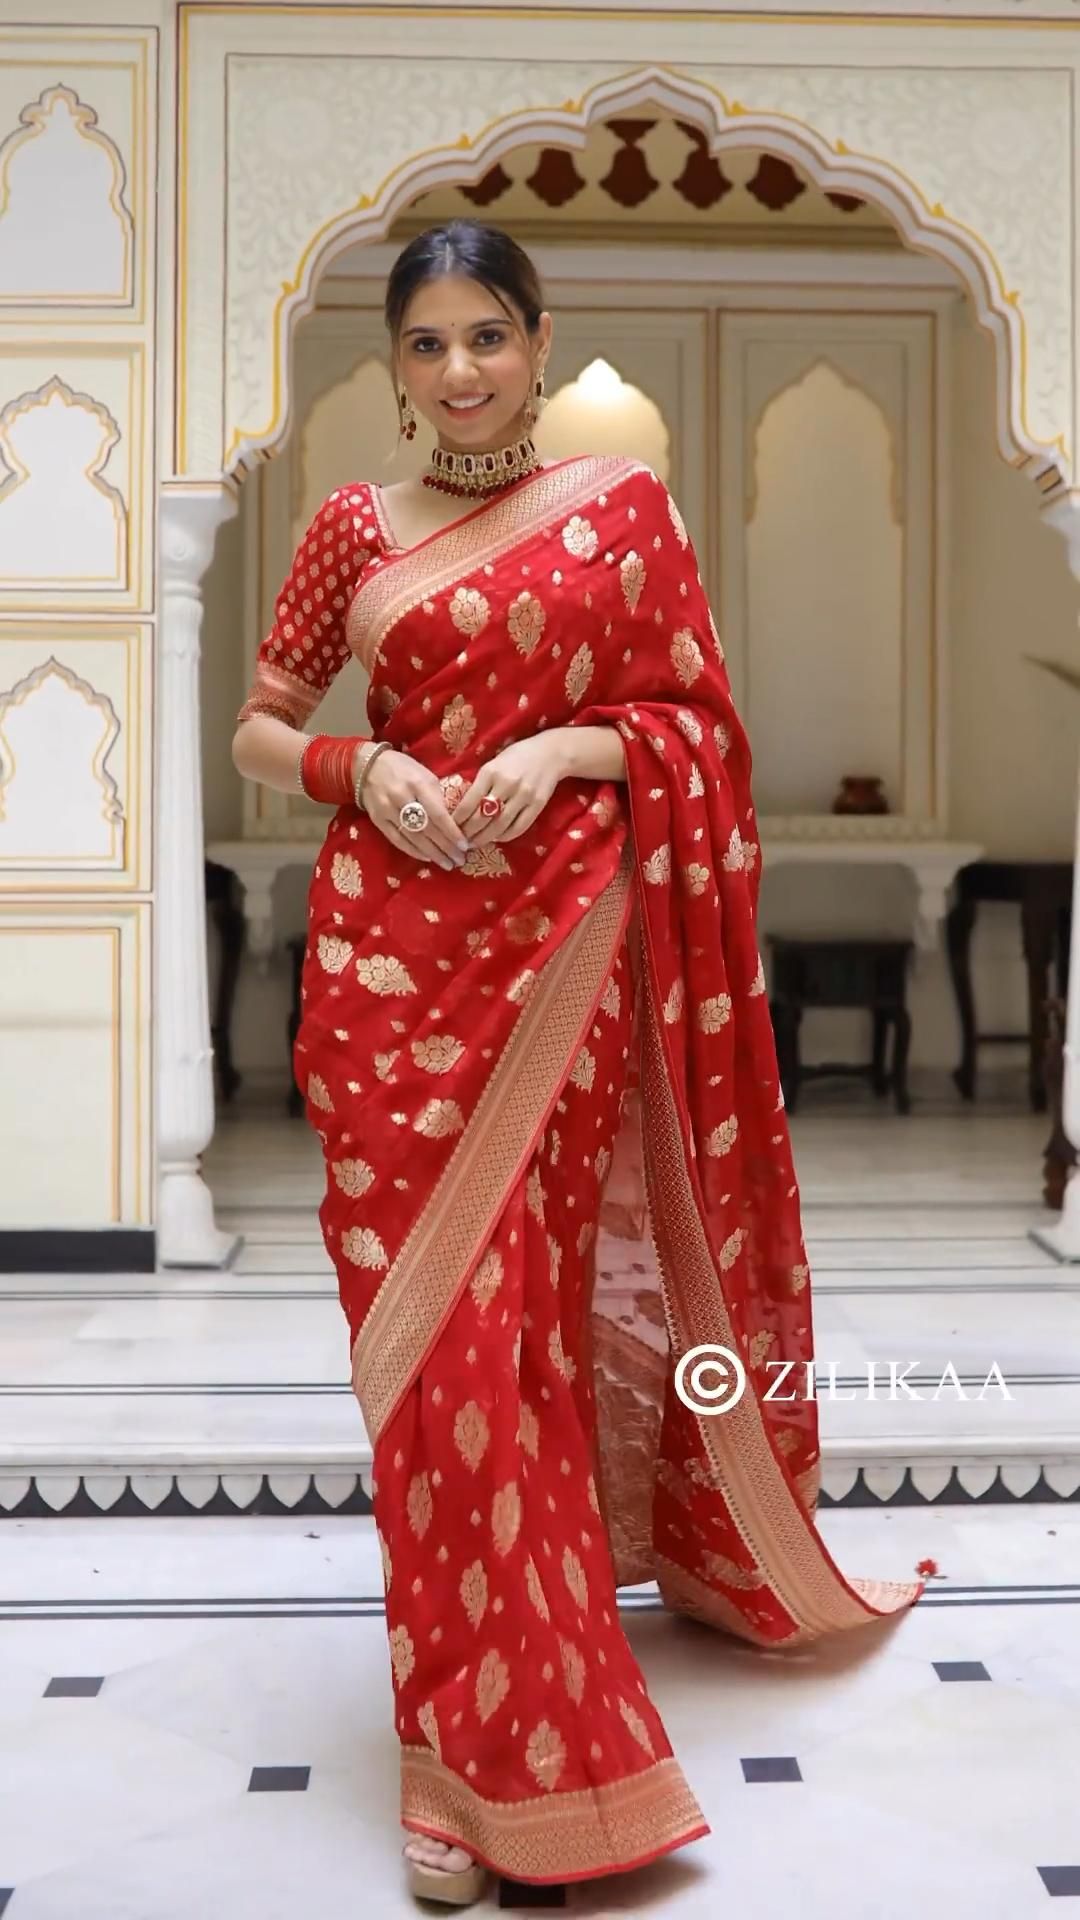 Georgette Sarees: Lightweight and Elegant Drapes